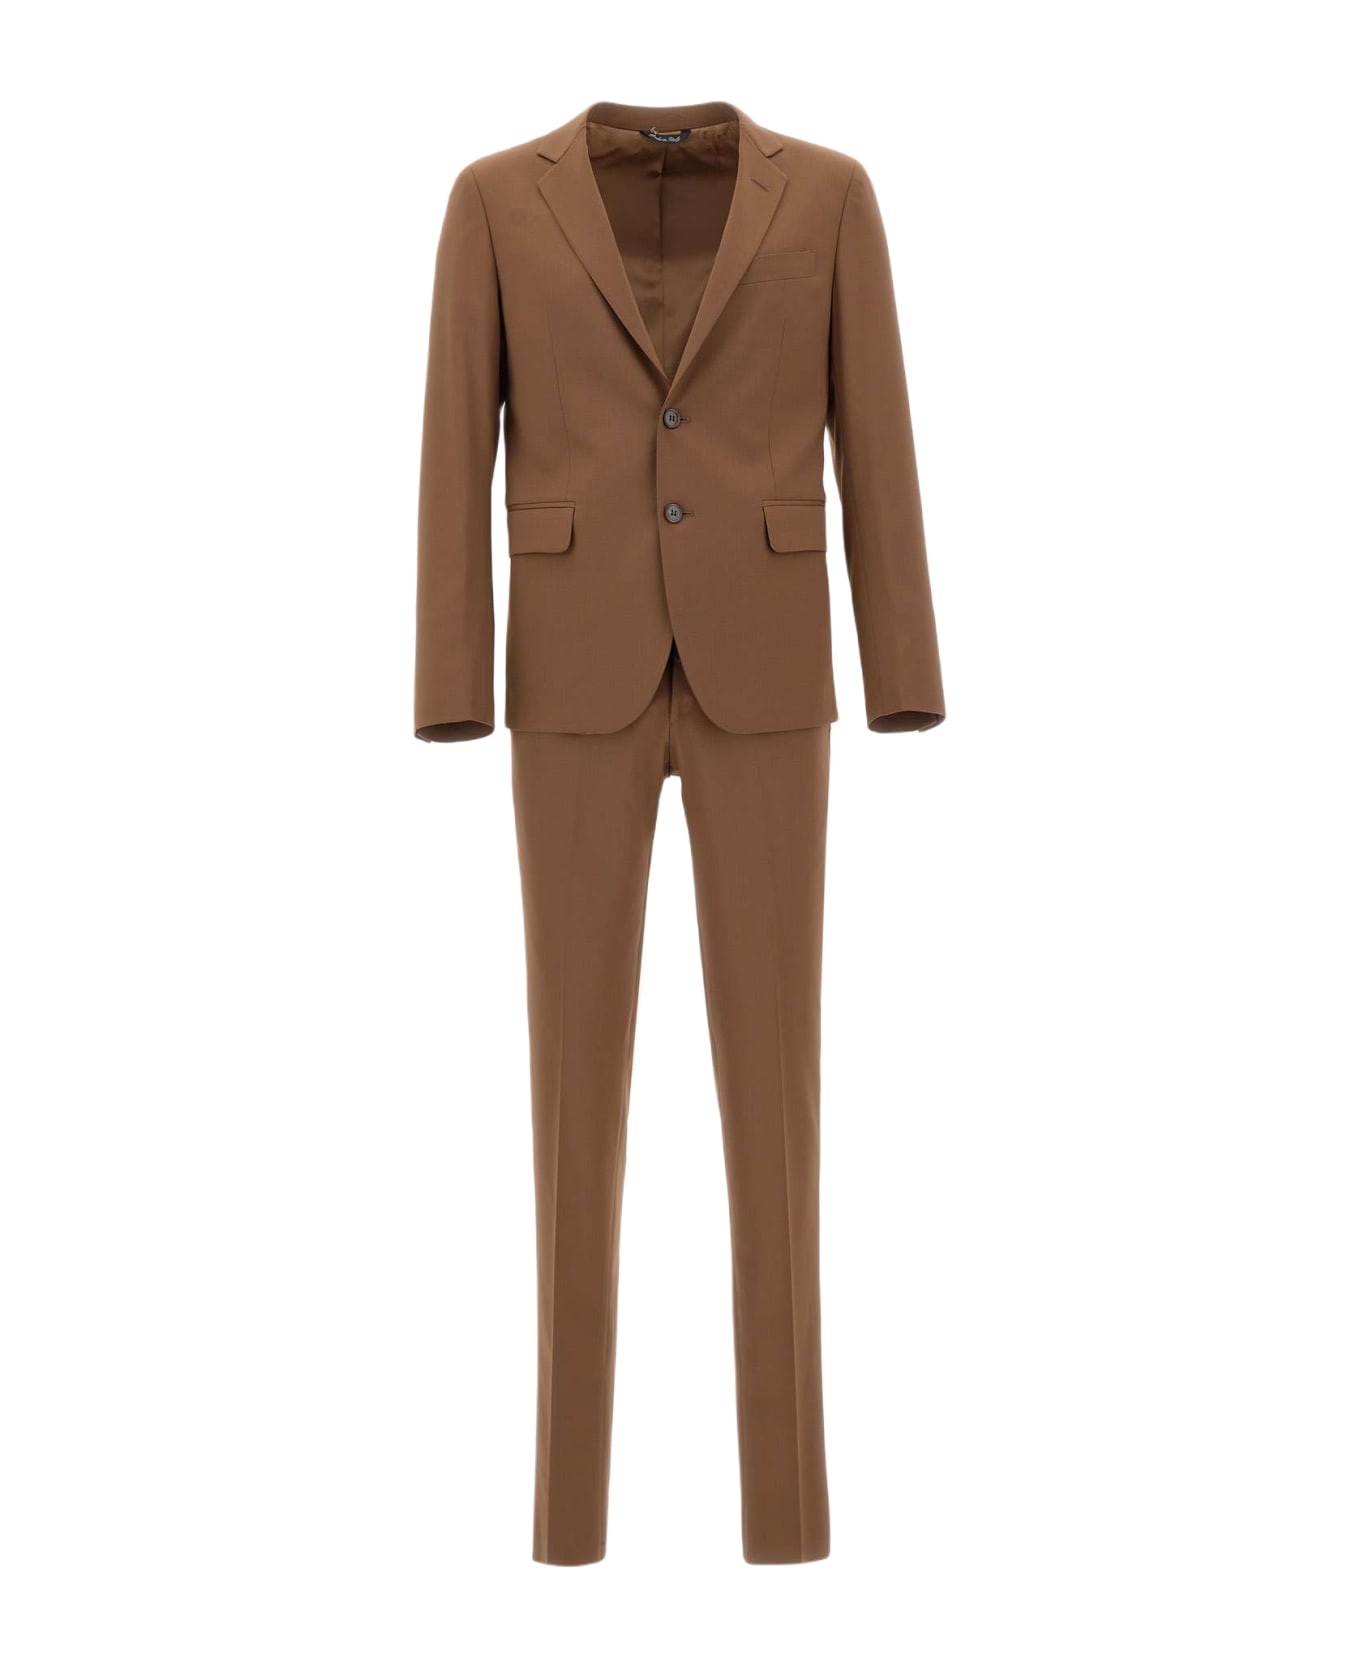 Brian Dales "ga87" Suit Two-piece Cool Wool - BROWN